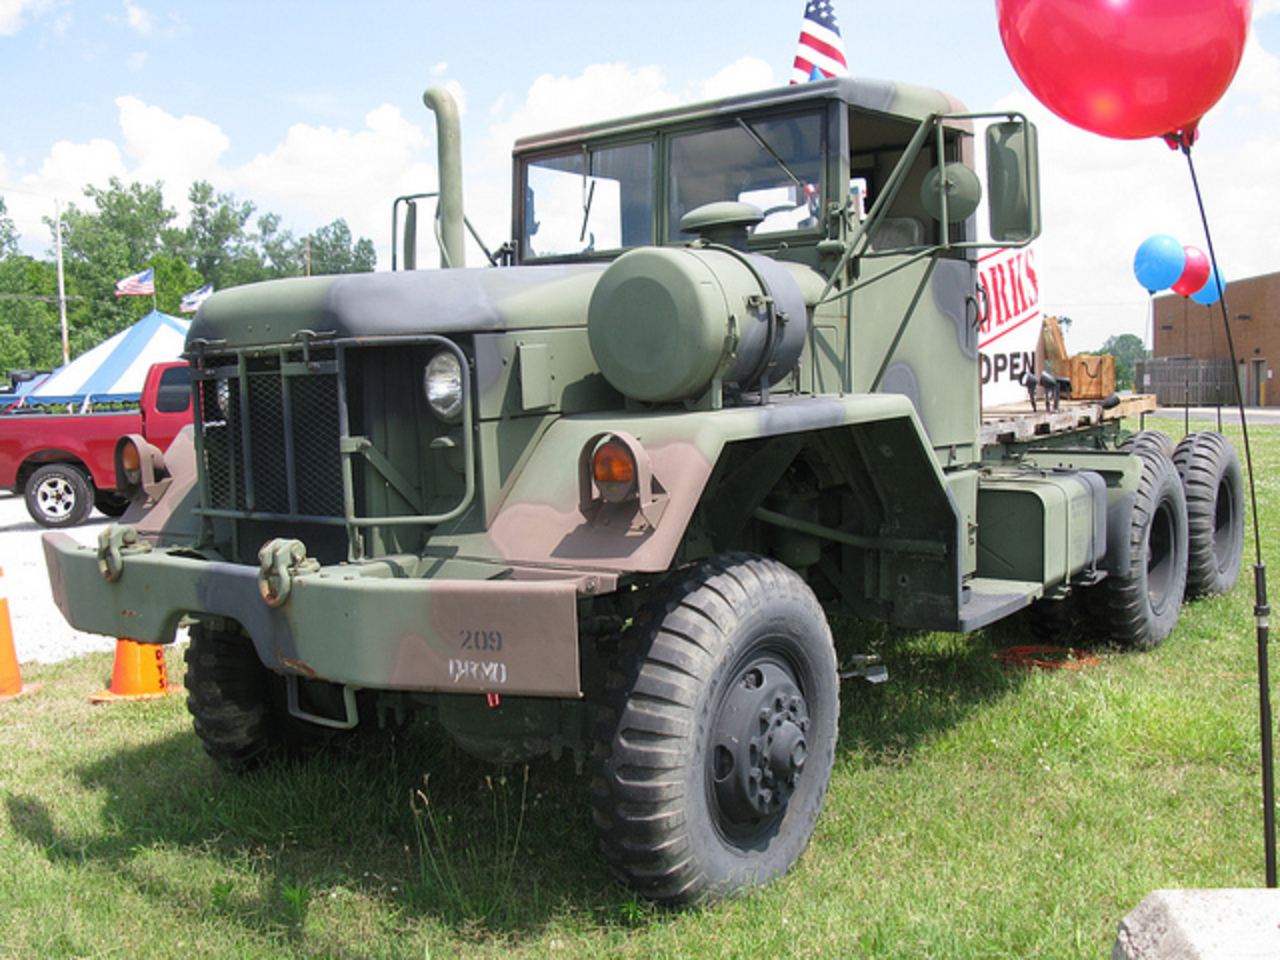 Flickr: The US Army trucks Pool